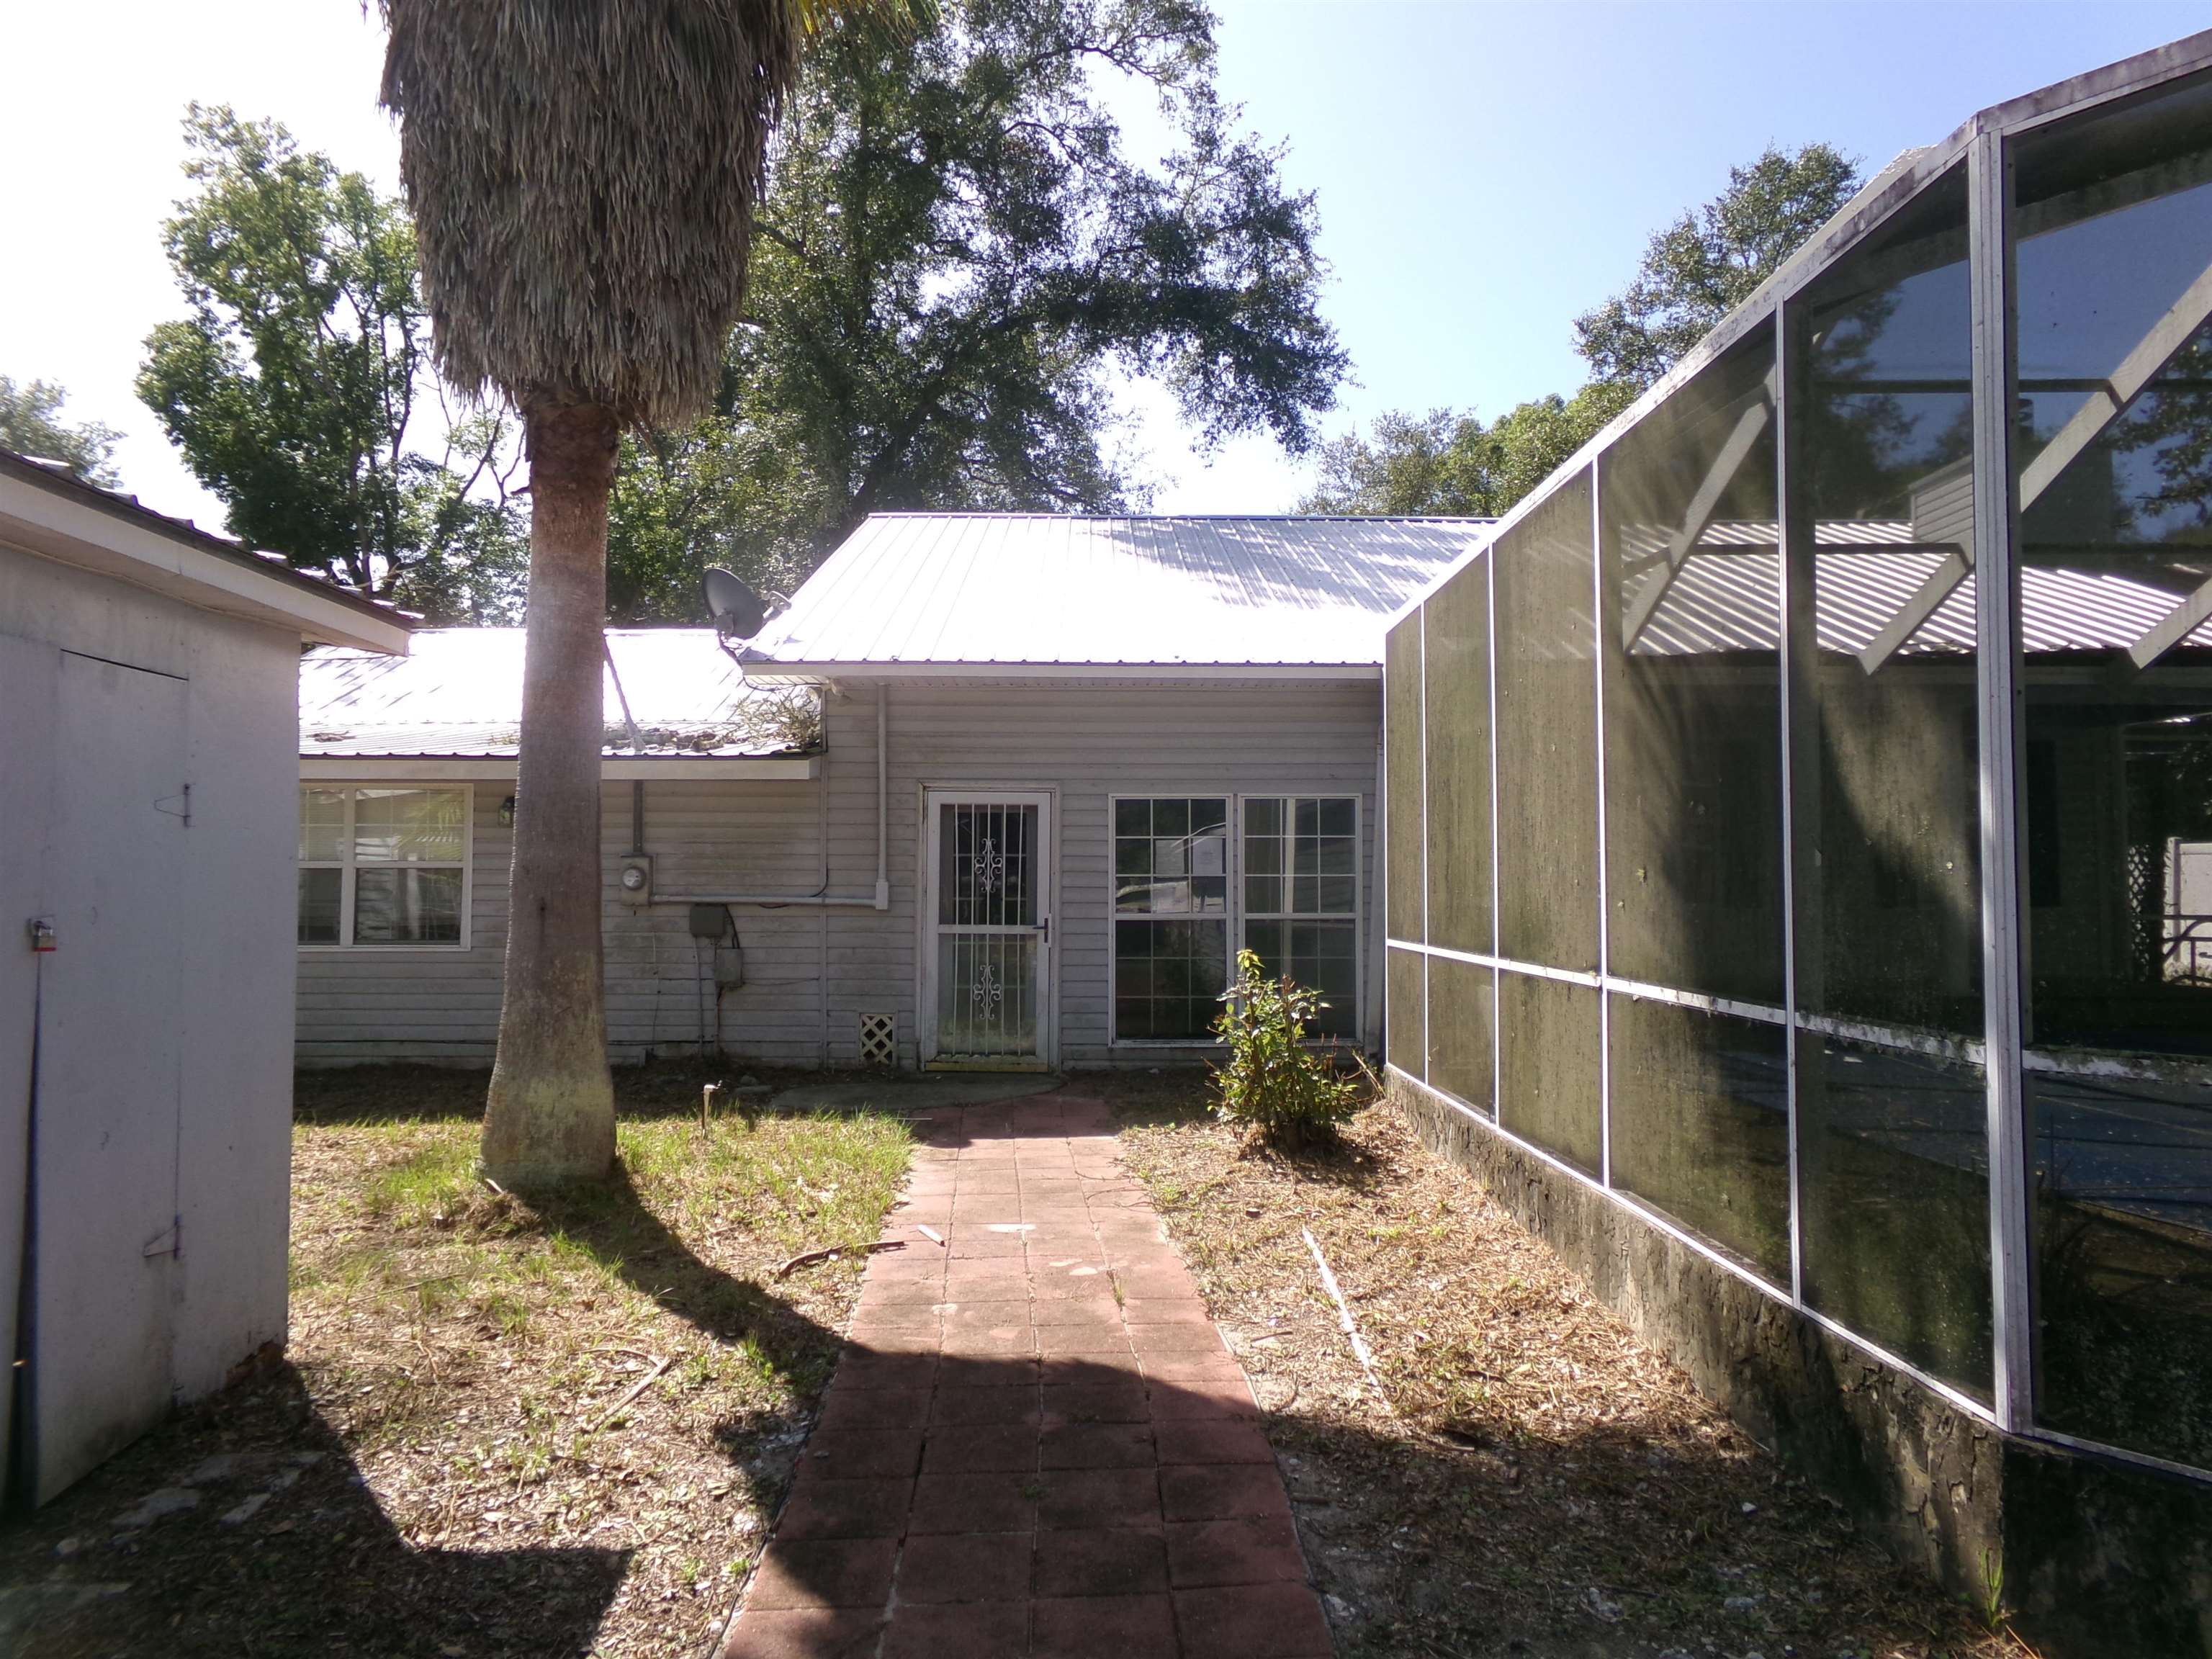 501 NW Avenue F Street,CARRABELLE,Florida 32322,4 Bedrooms Bedrooms,3 BathroomsBathrooms,Detached single family,501 NW Avenue F Street,365143